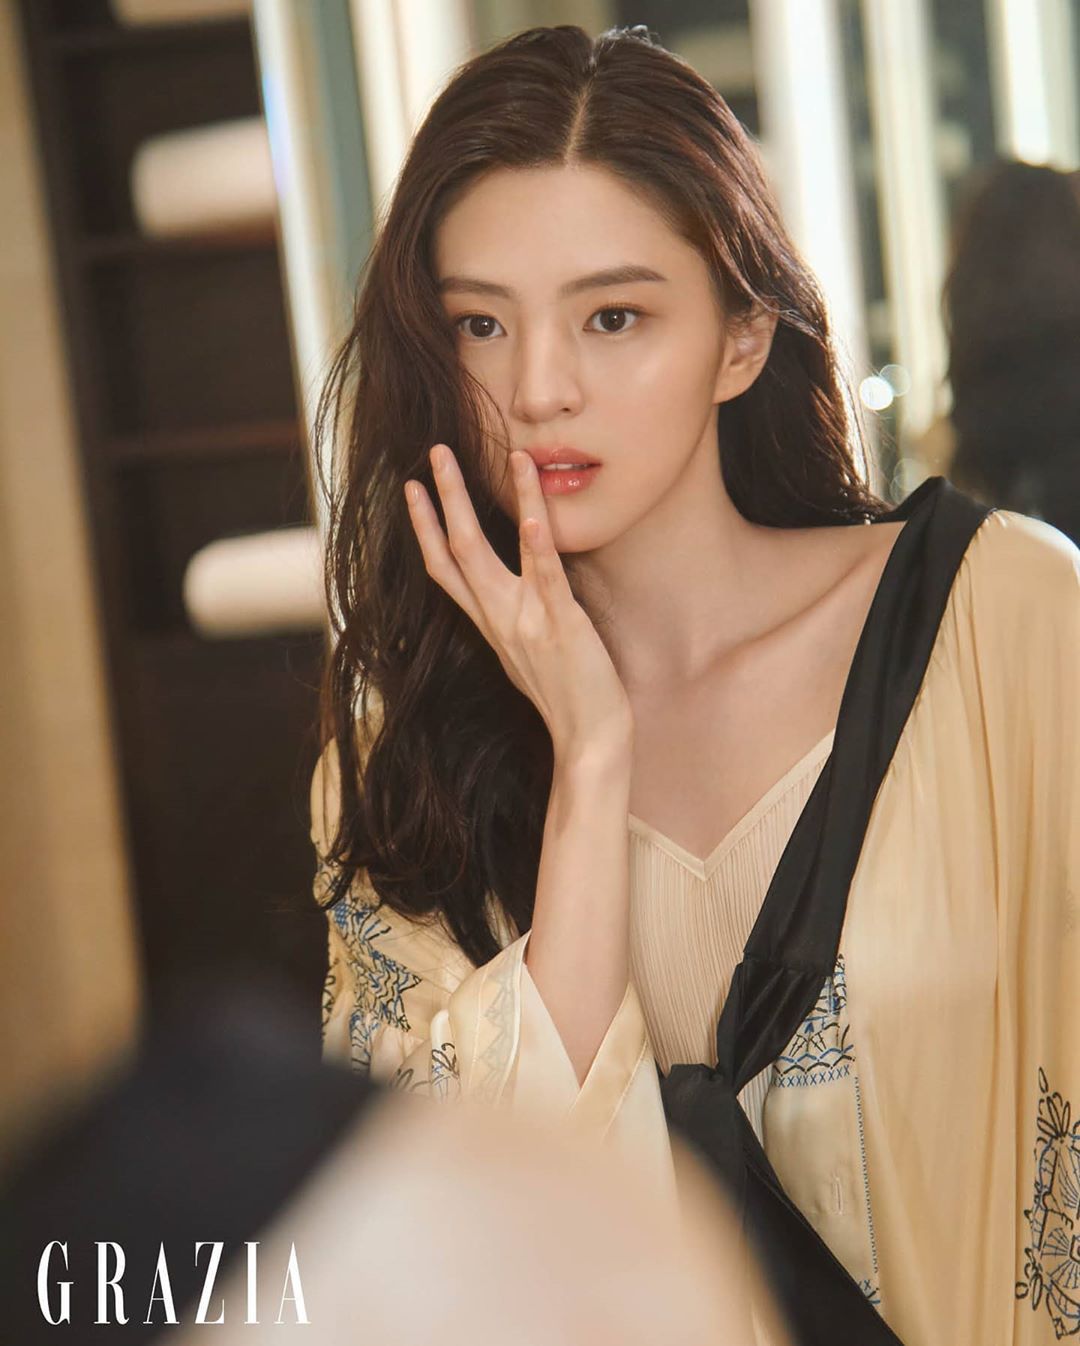 Han So Hee Is A Fascinating Beauty In The Photohoot Of Grazia +